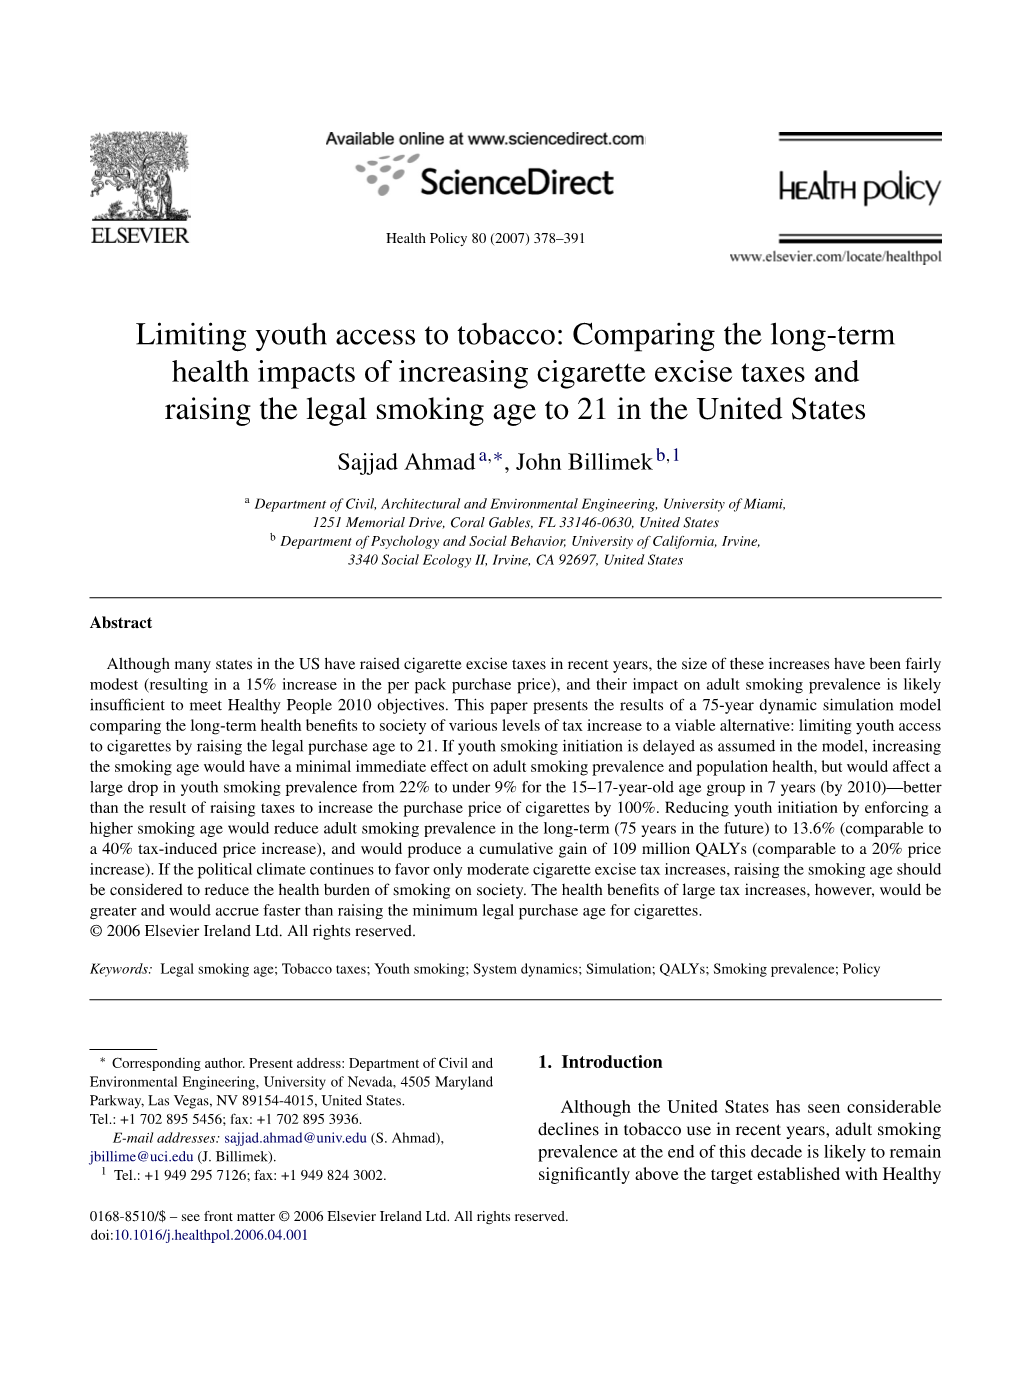 Comparing the Long-Term Health Impacts of Increasing Cigarette Excise Taxes and Raising the Legal Smoking Age to 21 in the United States